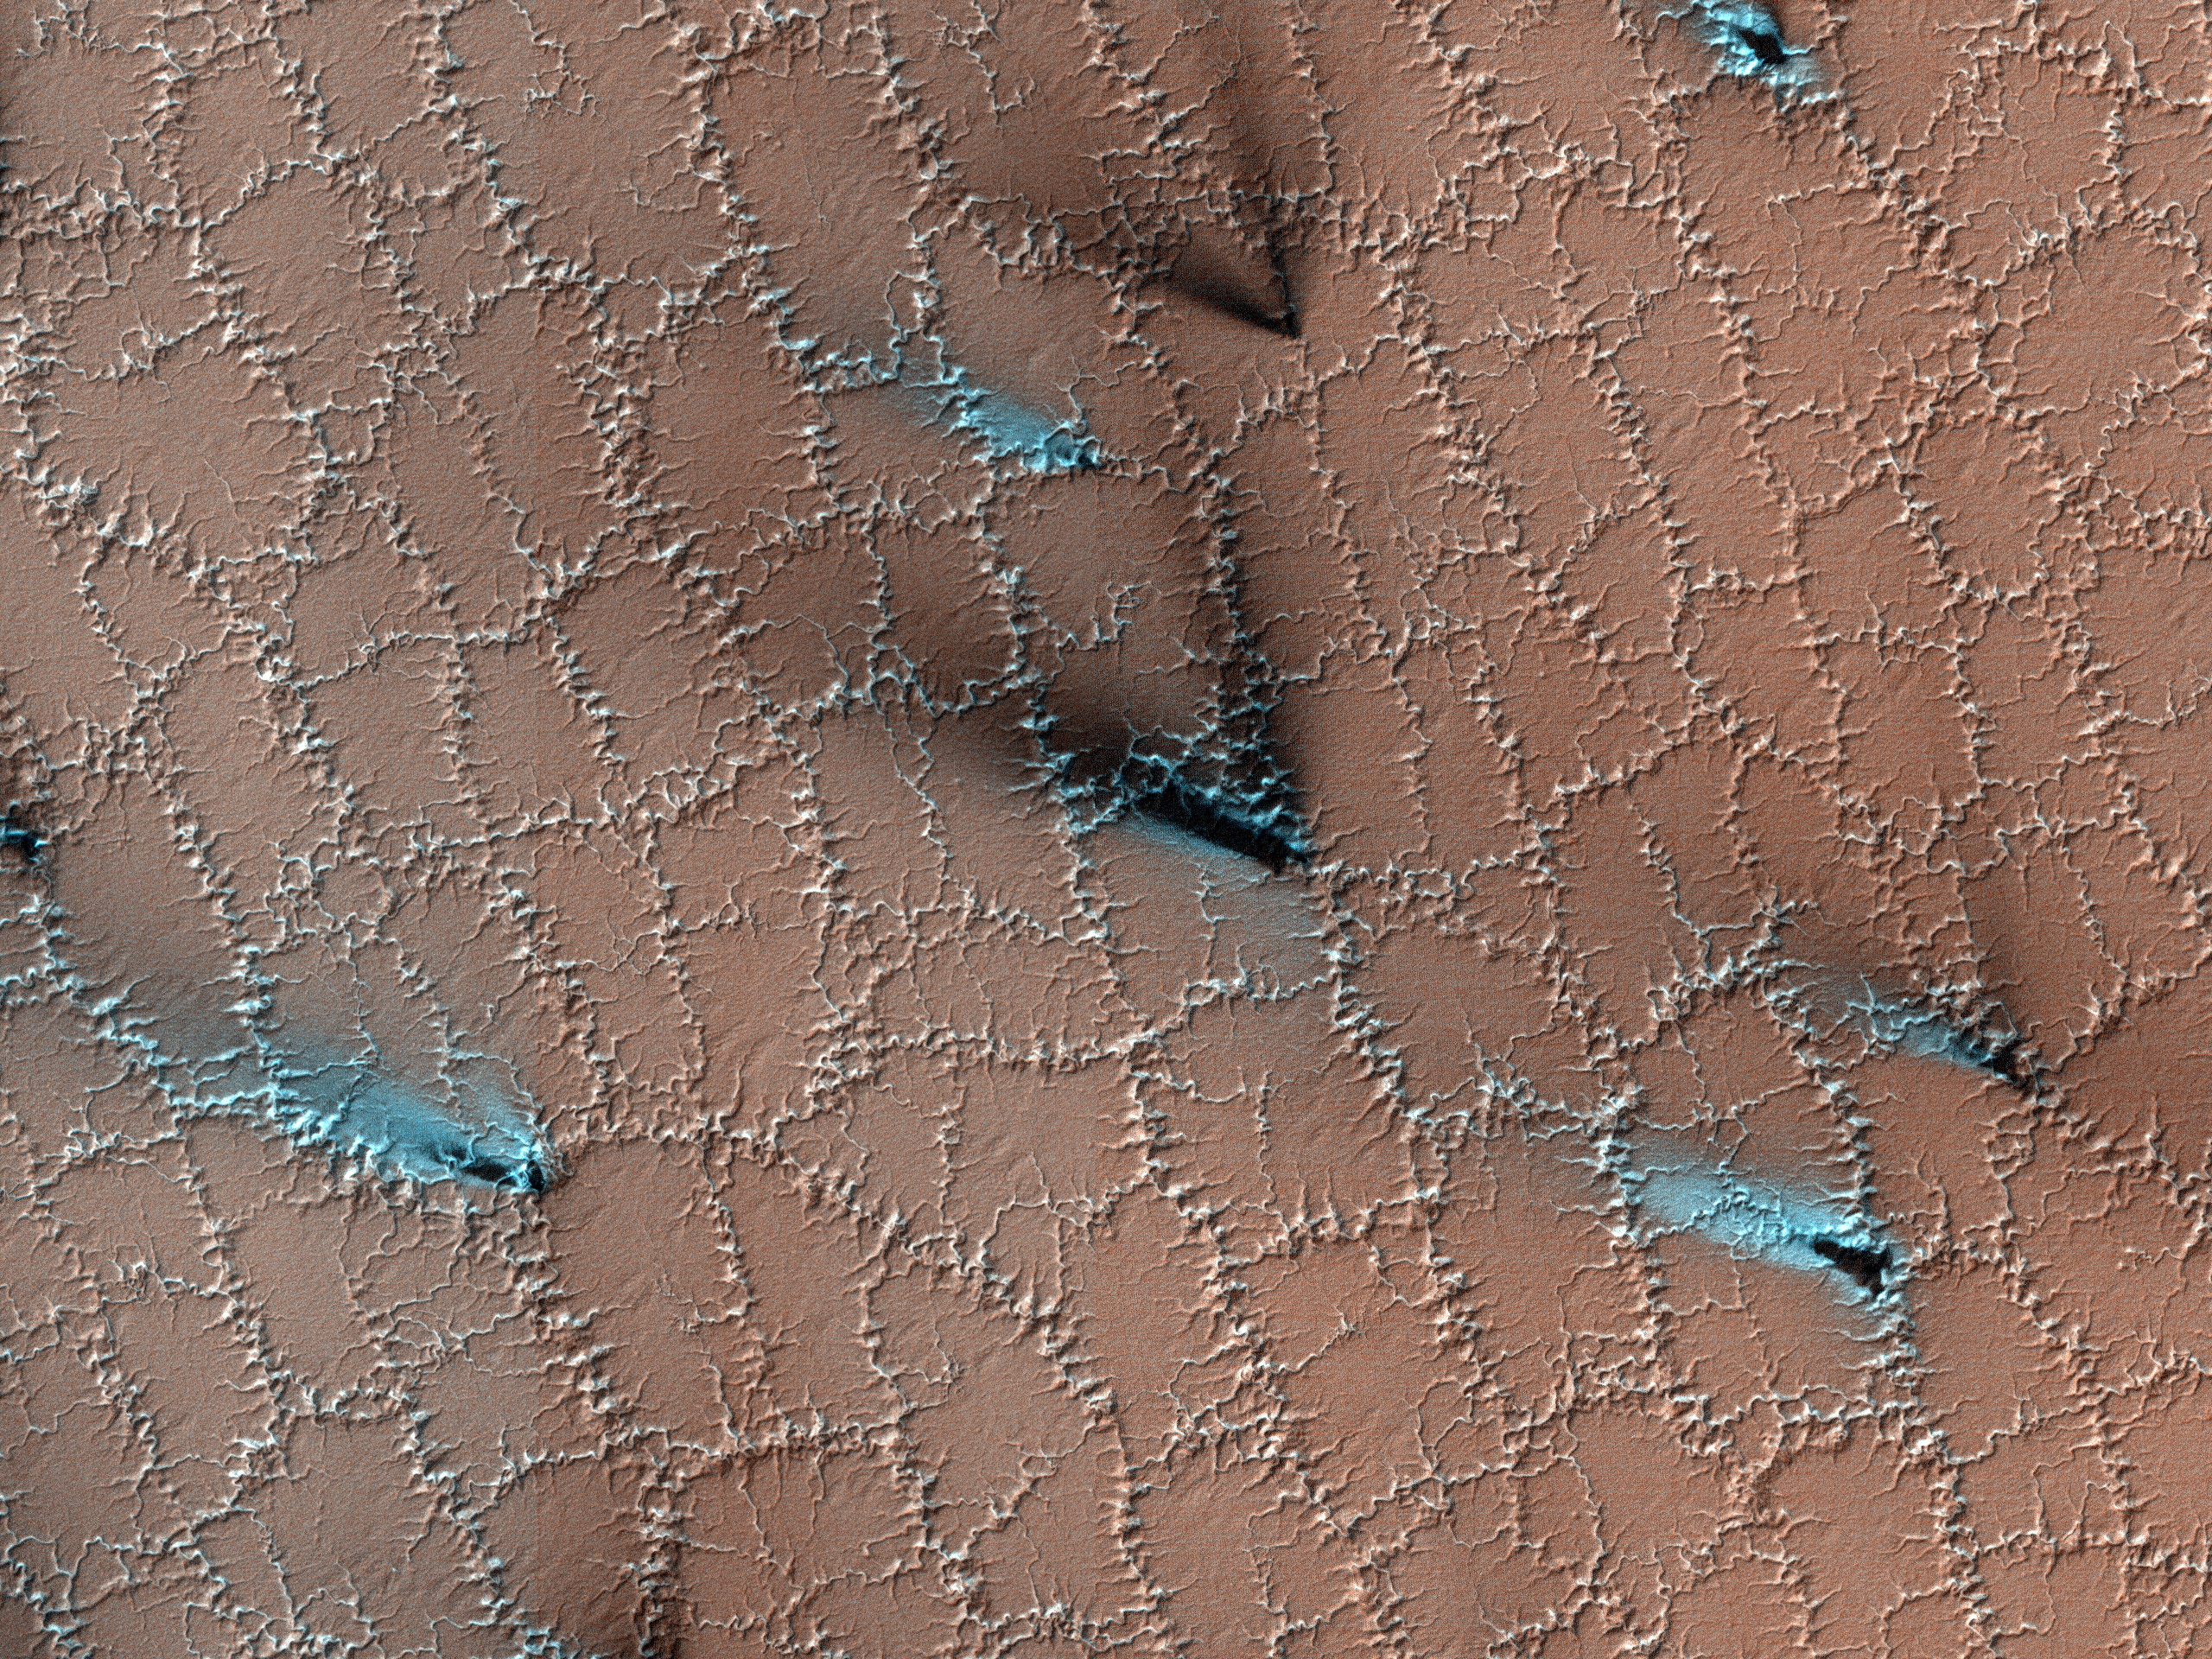 Spring Fans and Polygons on Mars as seen by the HiRISE on board the MRO. Image Credit: NASA/JPL-Caltech/UArizona.